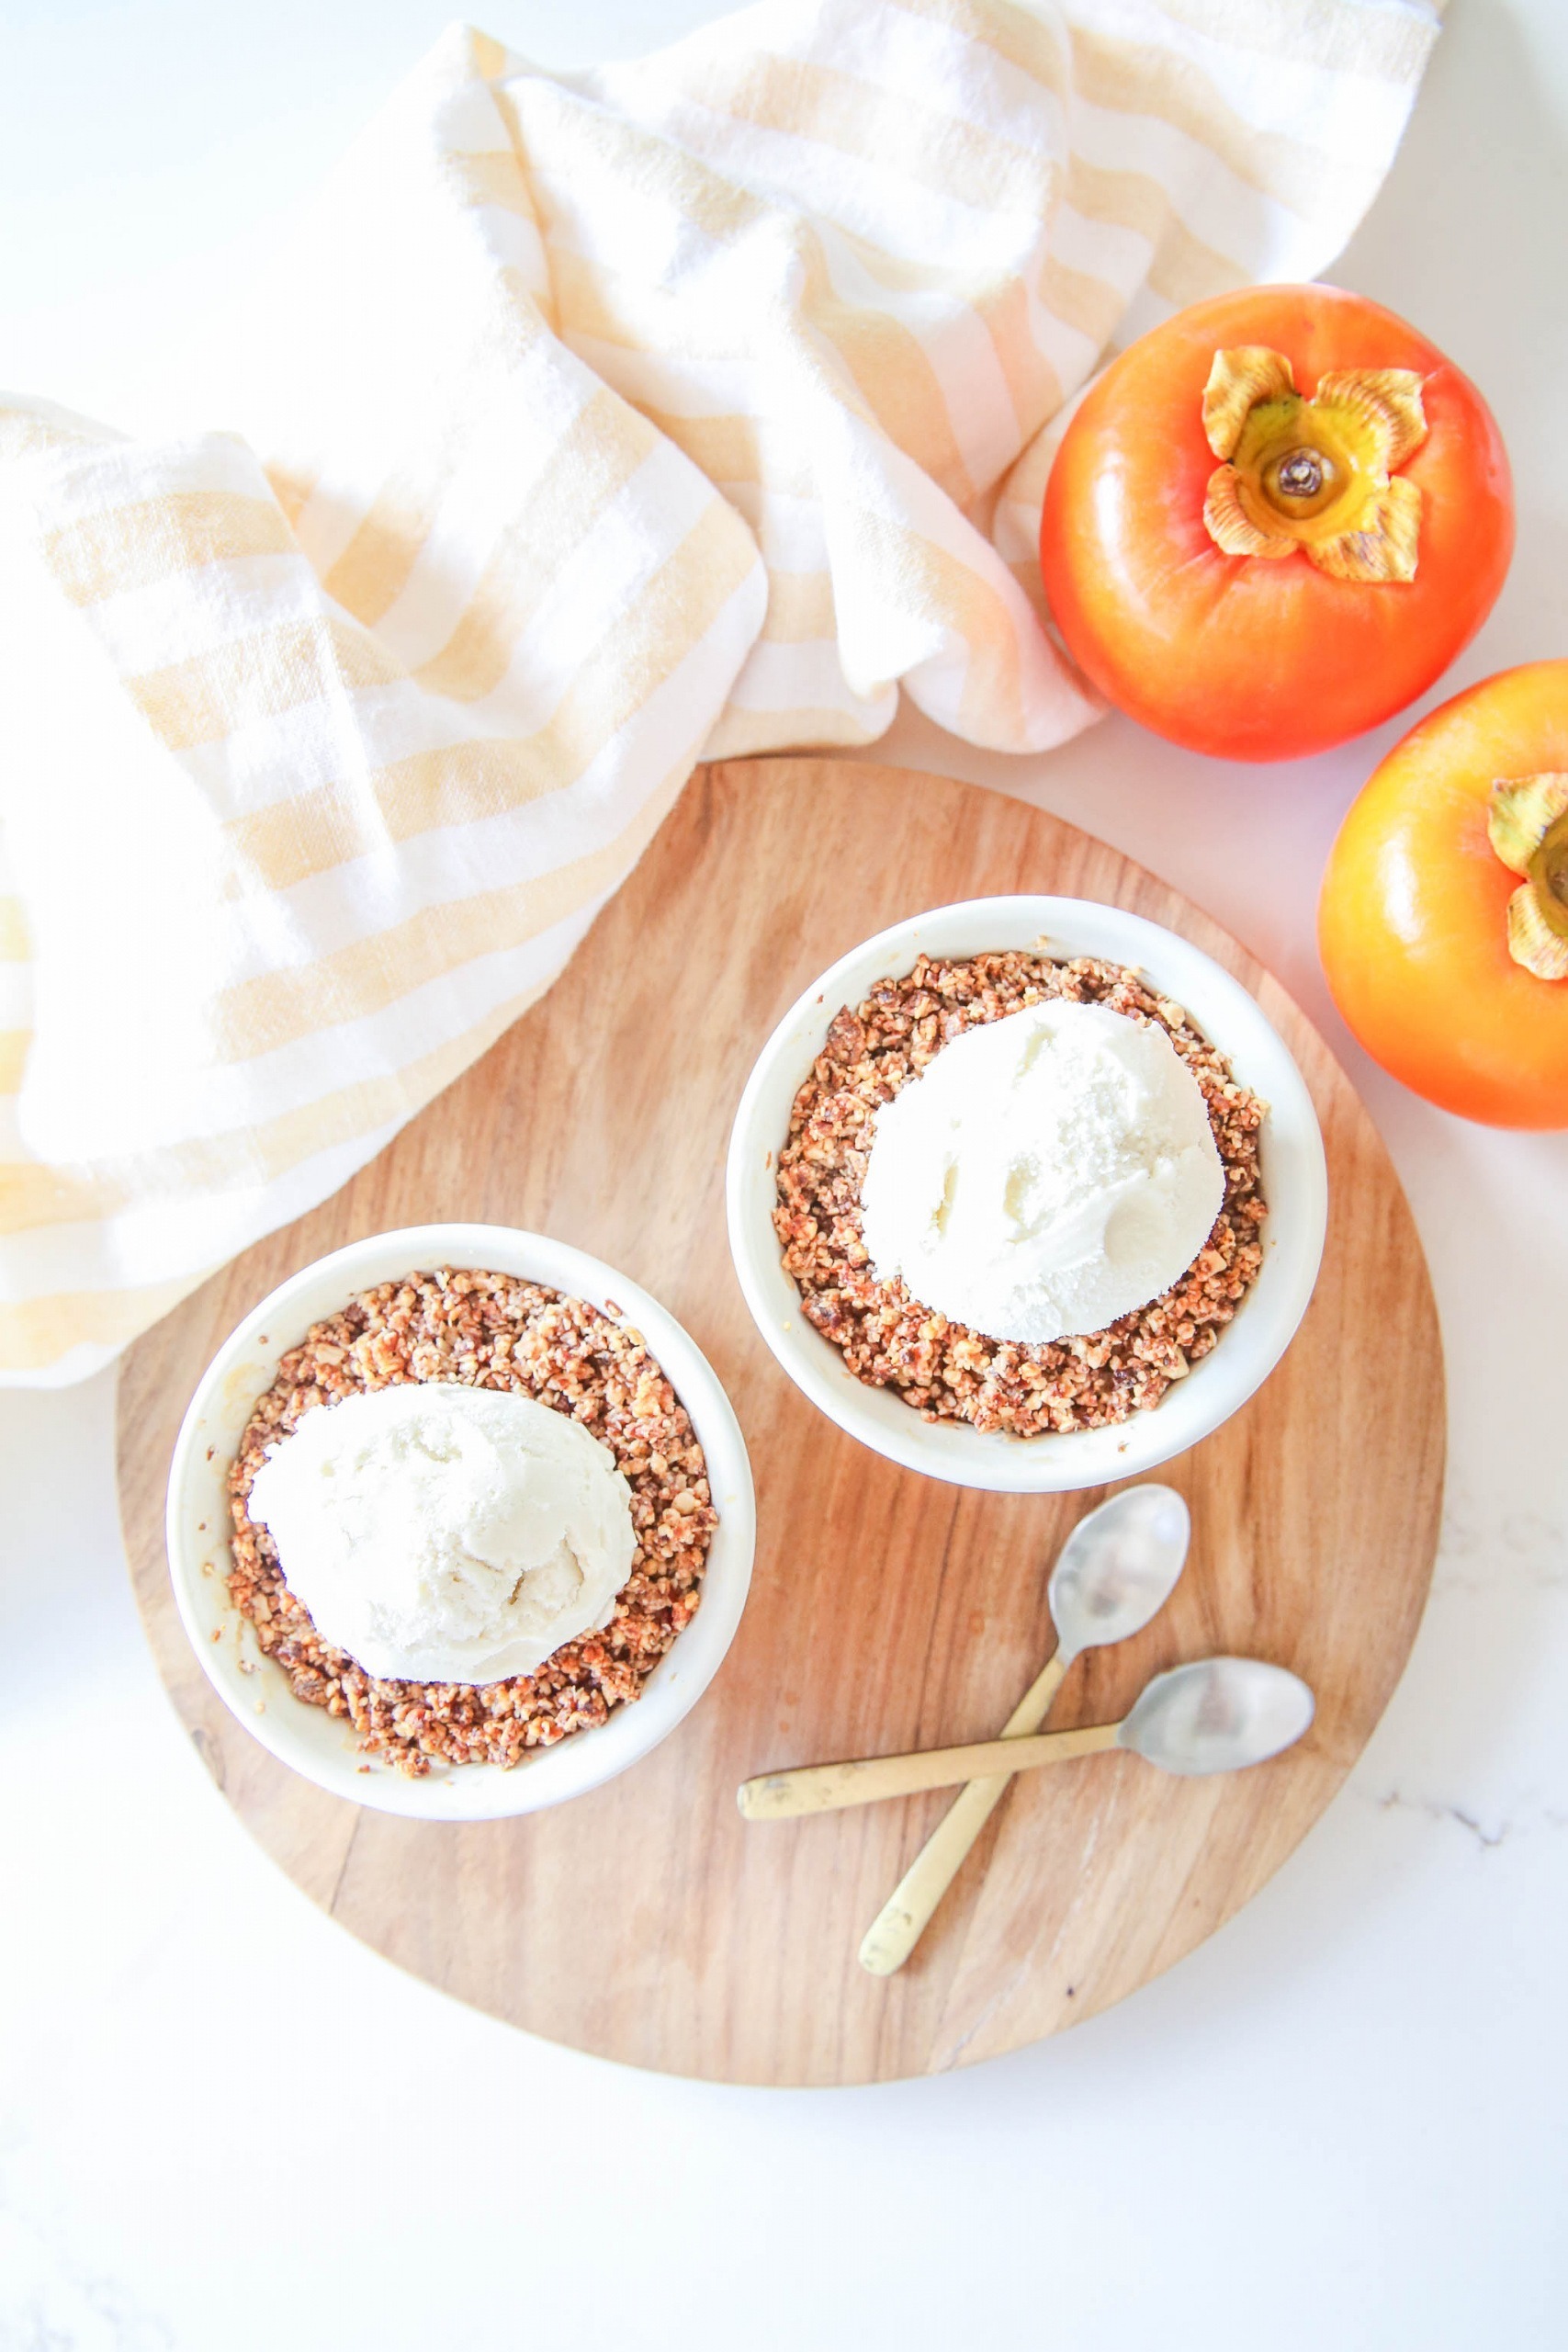 Two Persimmon and Apple Crumbles with a scoop of ice cream on top, placed on a chopping board. Two Persimmon placed in the corner